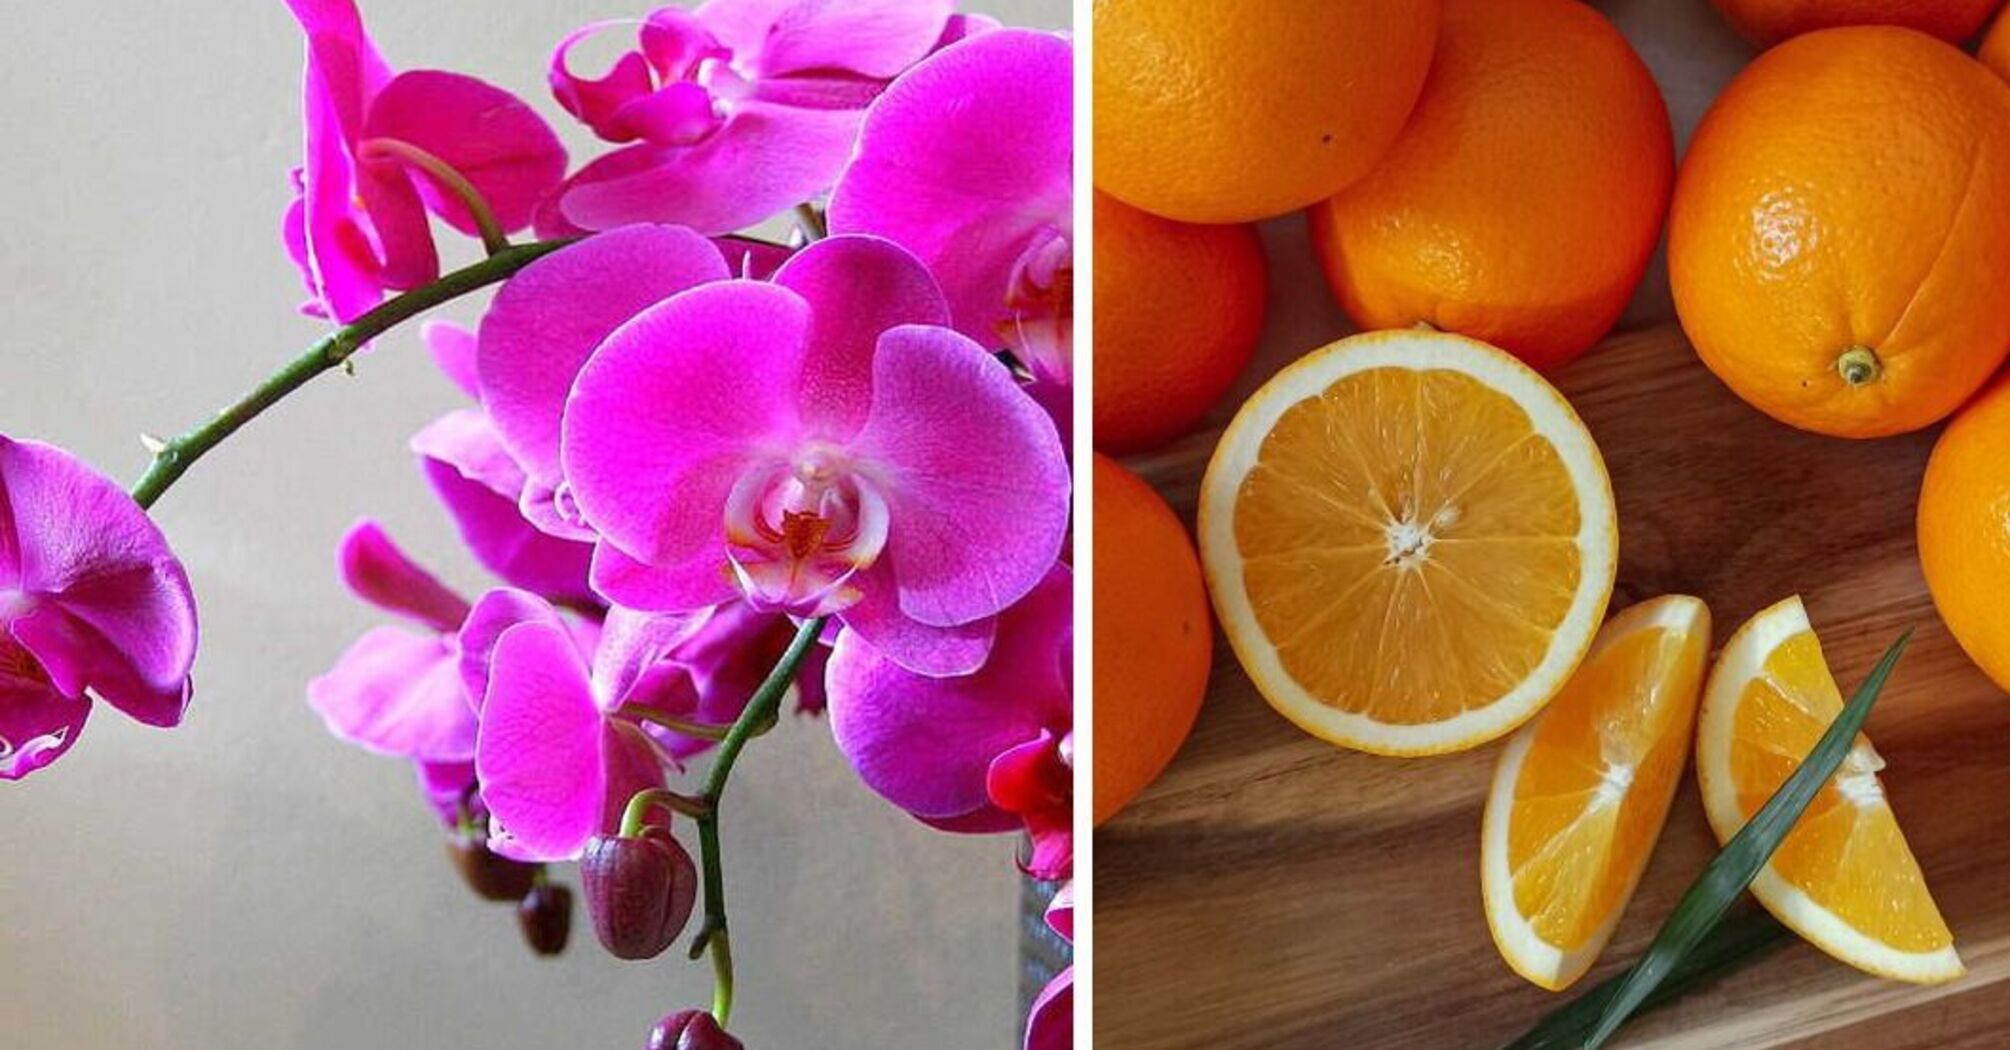 The plant will revive and bloom: how to prepare orange water for orchids